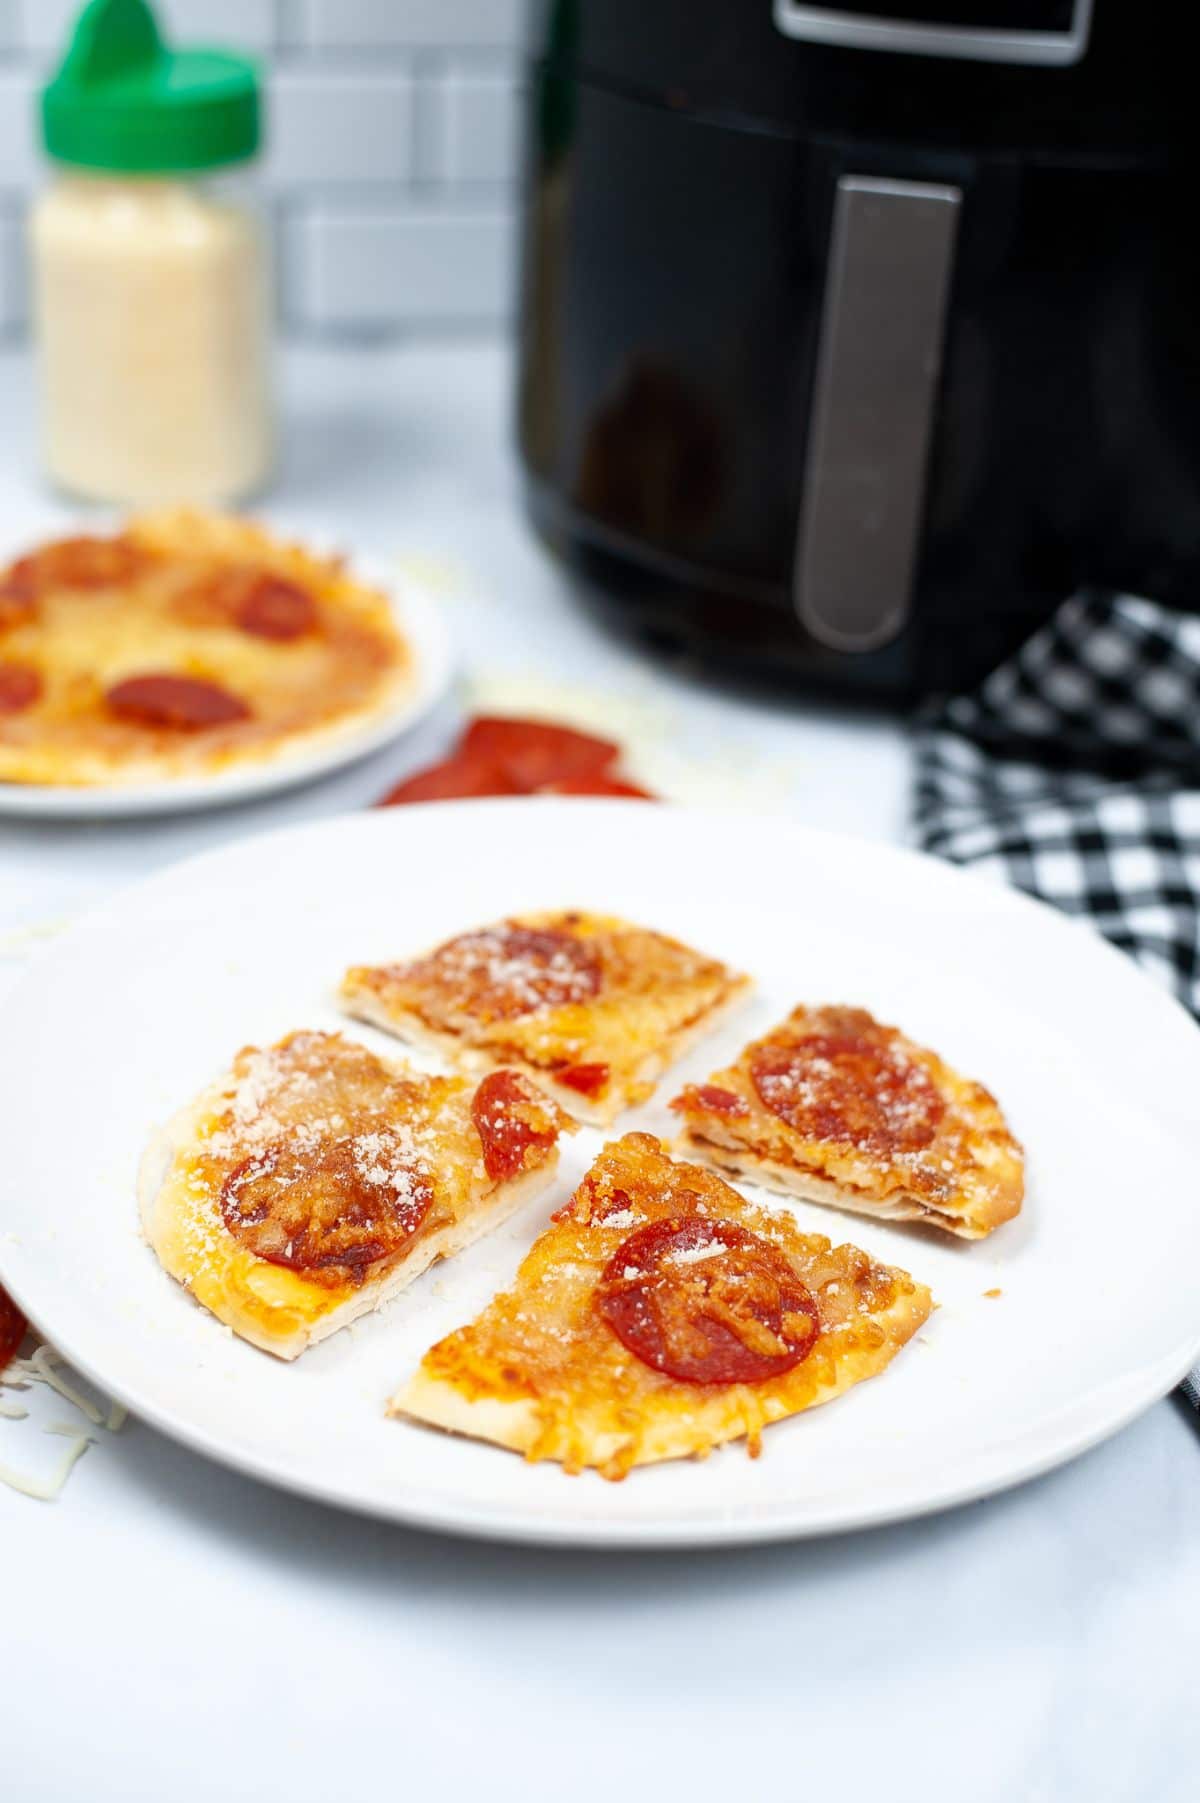 Air Fryer Naan Bread Pizza sliced into 4 pieces on a white plate with an air fryer in the background and another pizza on a plate unsliced.